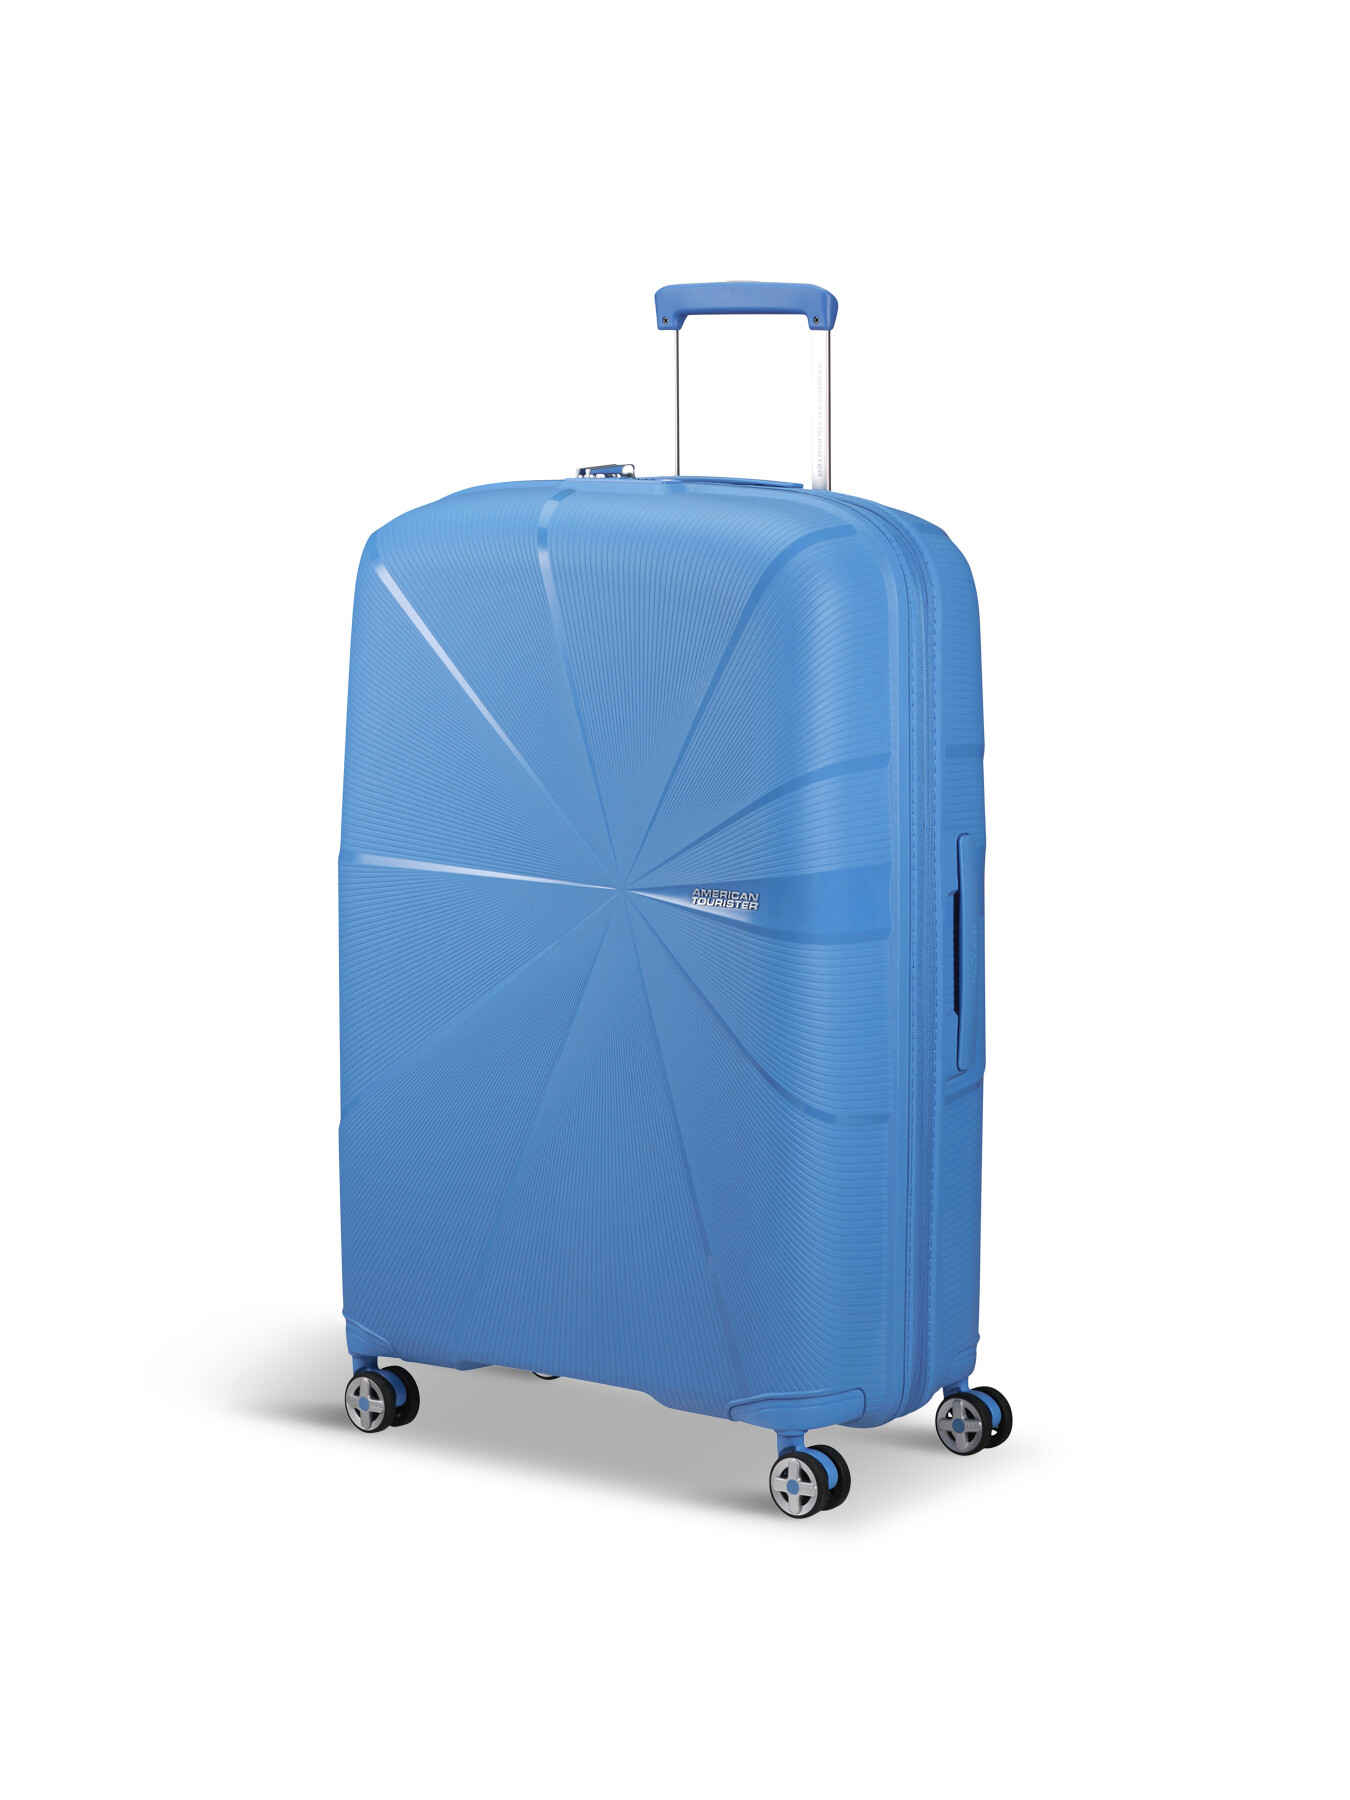 American Tourister American Tourister Starvibe Spinner Expandable 77cm  Suitcase, Tranquil Blue | Fenwick